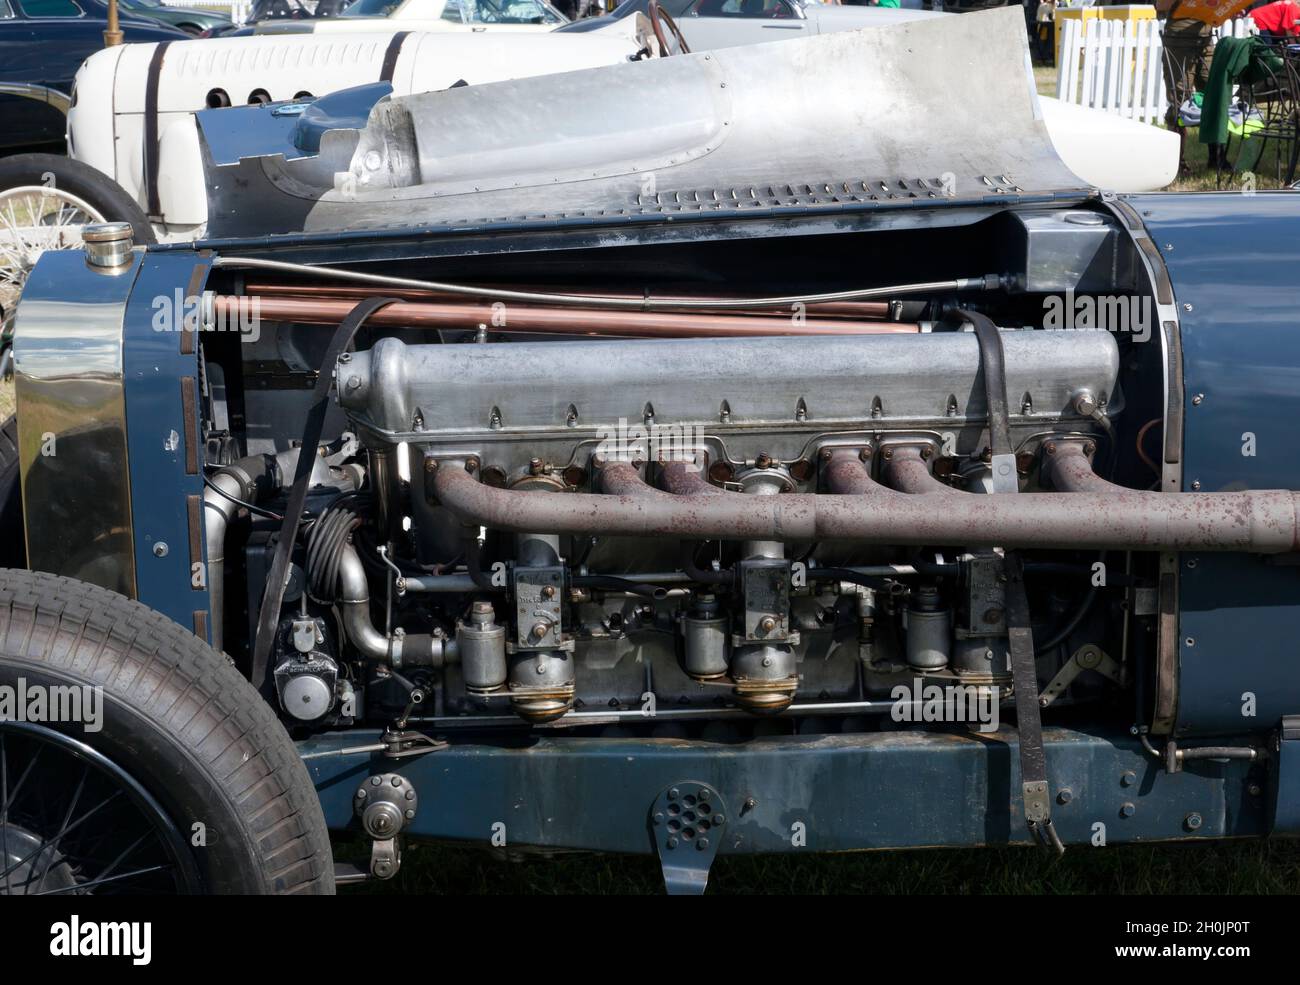 Close-up of the 27Litre Mb12 aero engine in a 1926/30 Delage Hispano Suiza SID, on display at the 2021, London Classic Car Show Stock Photo